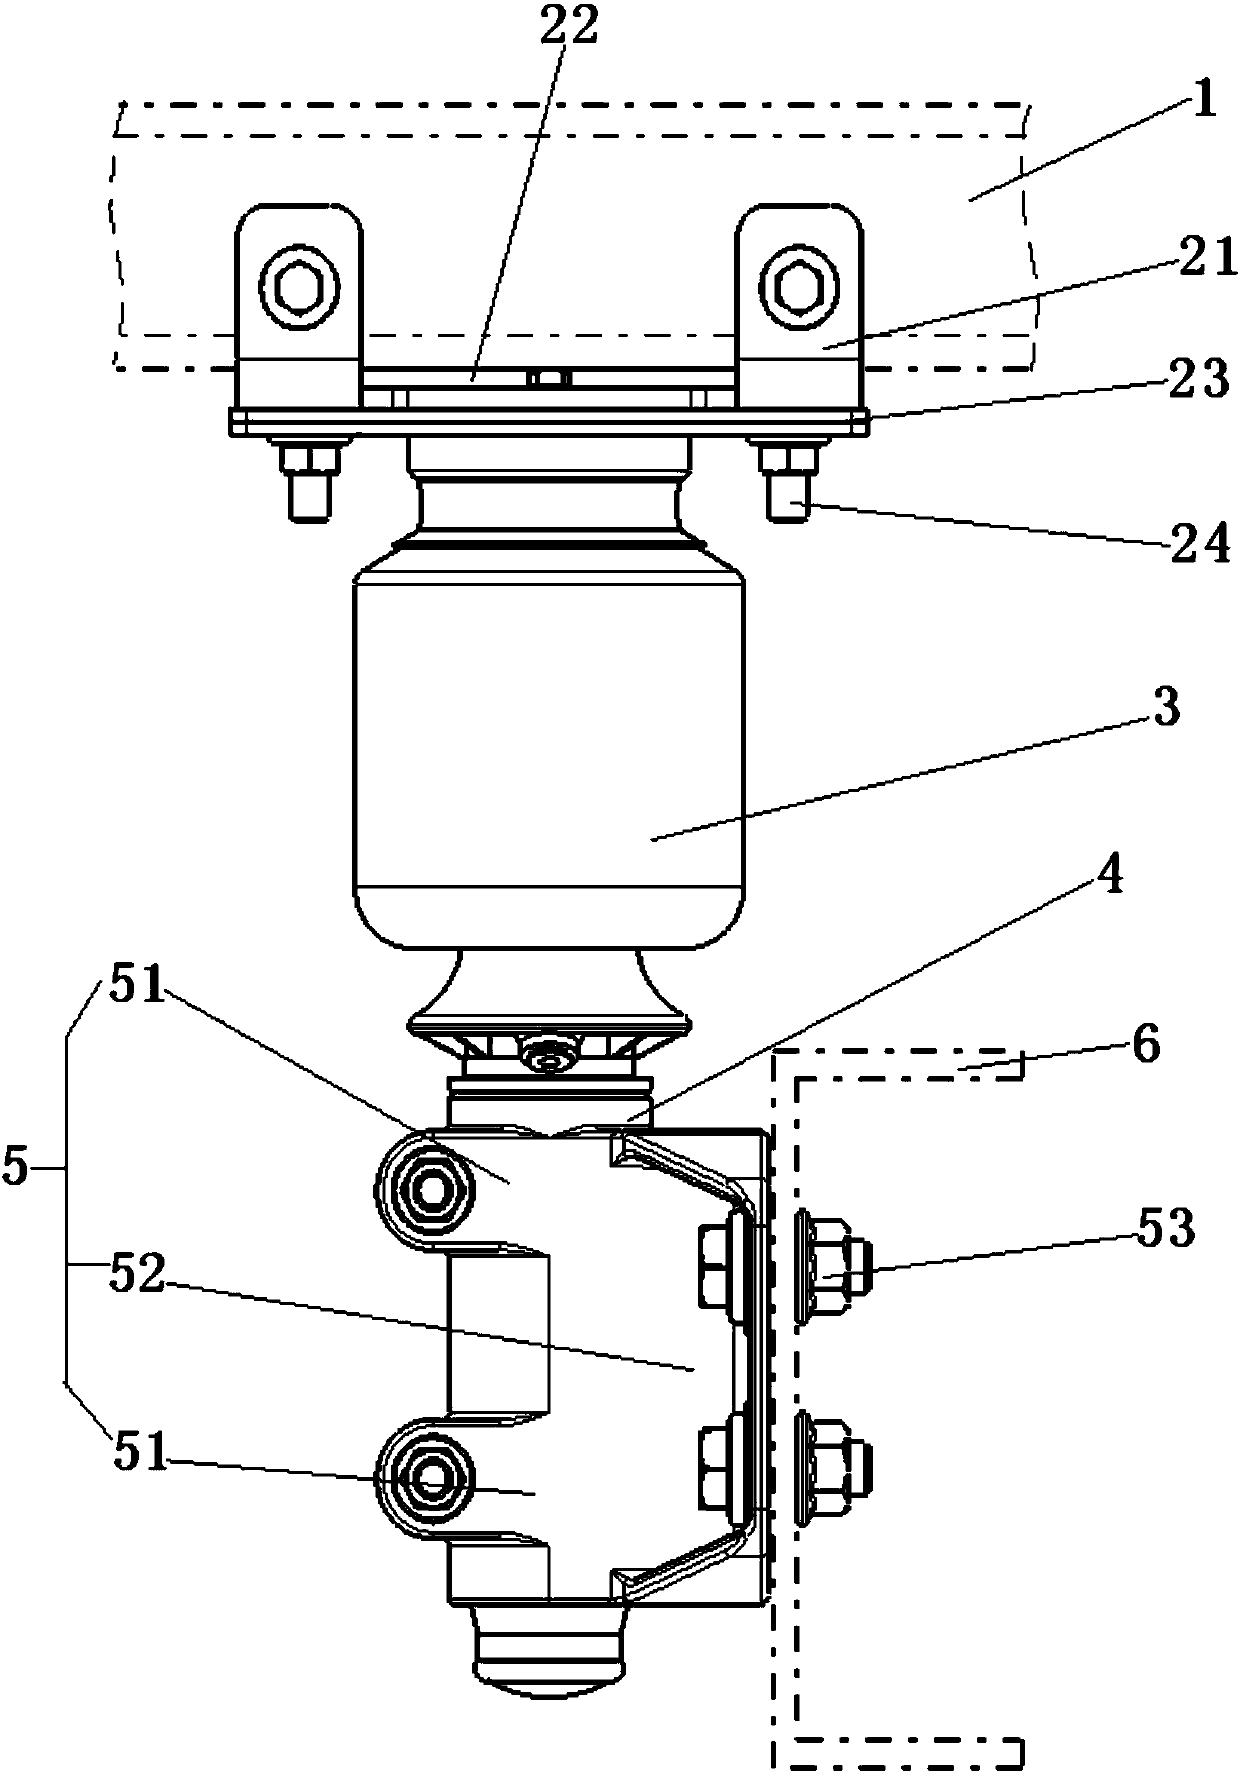 Connecting device for cab and car frame